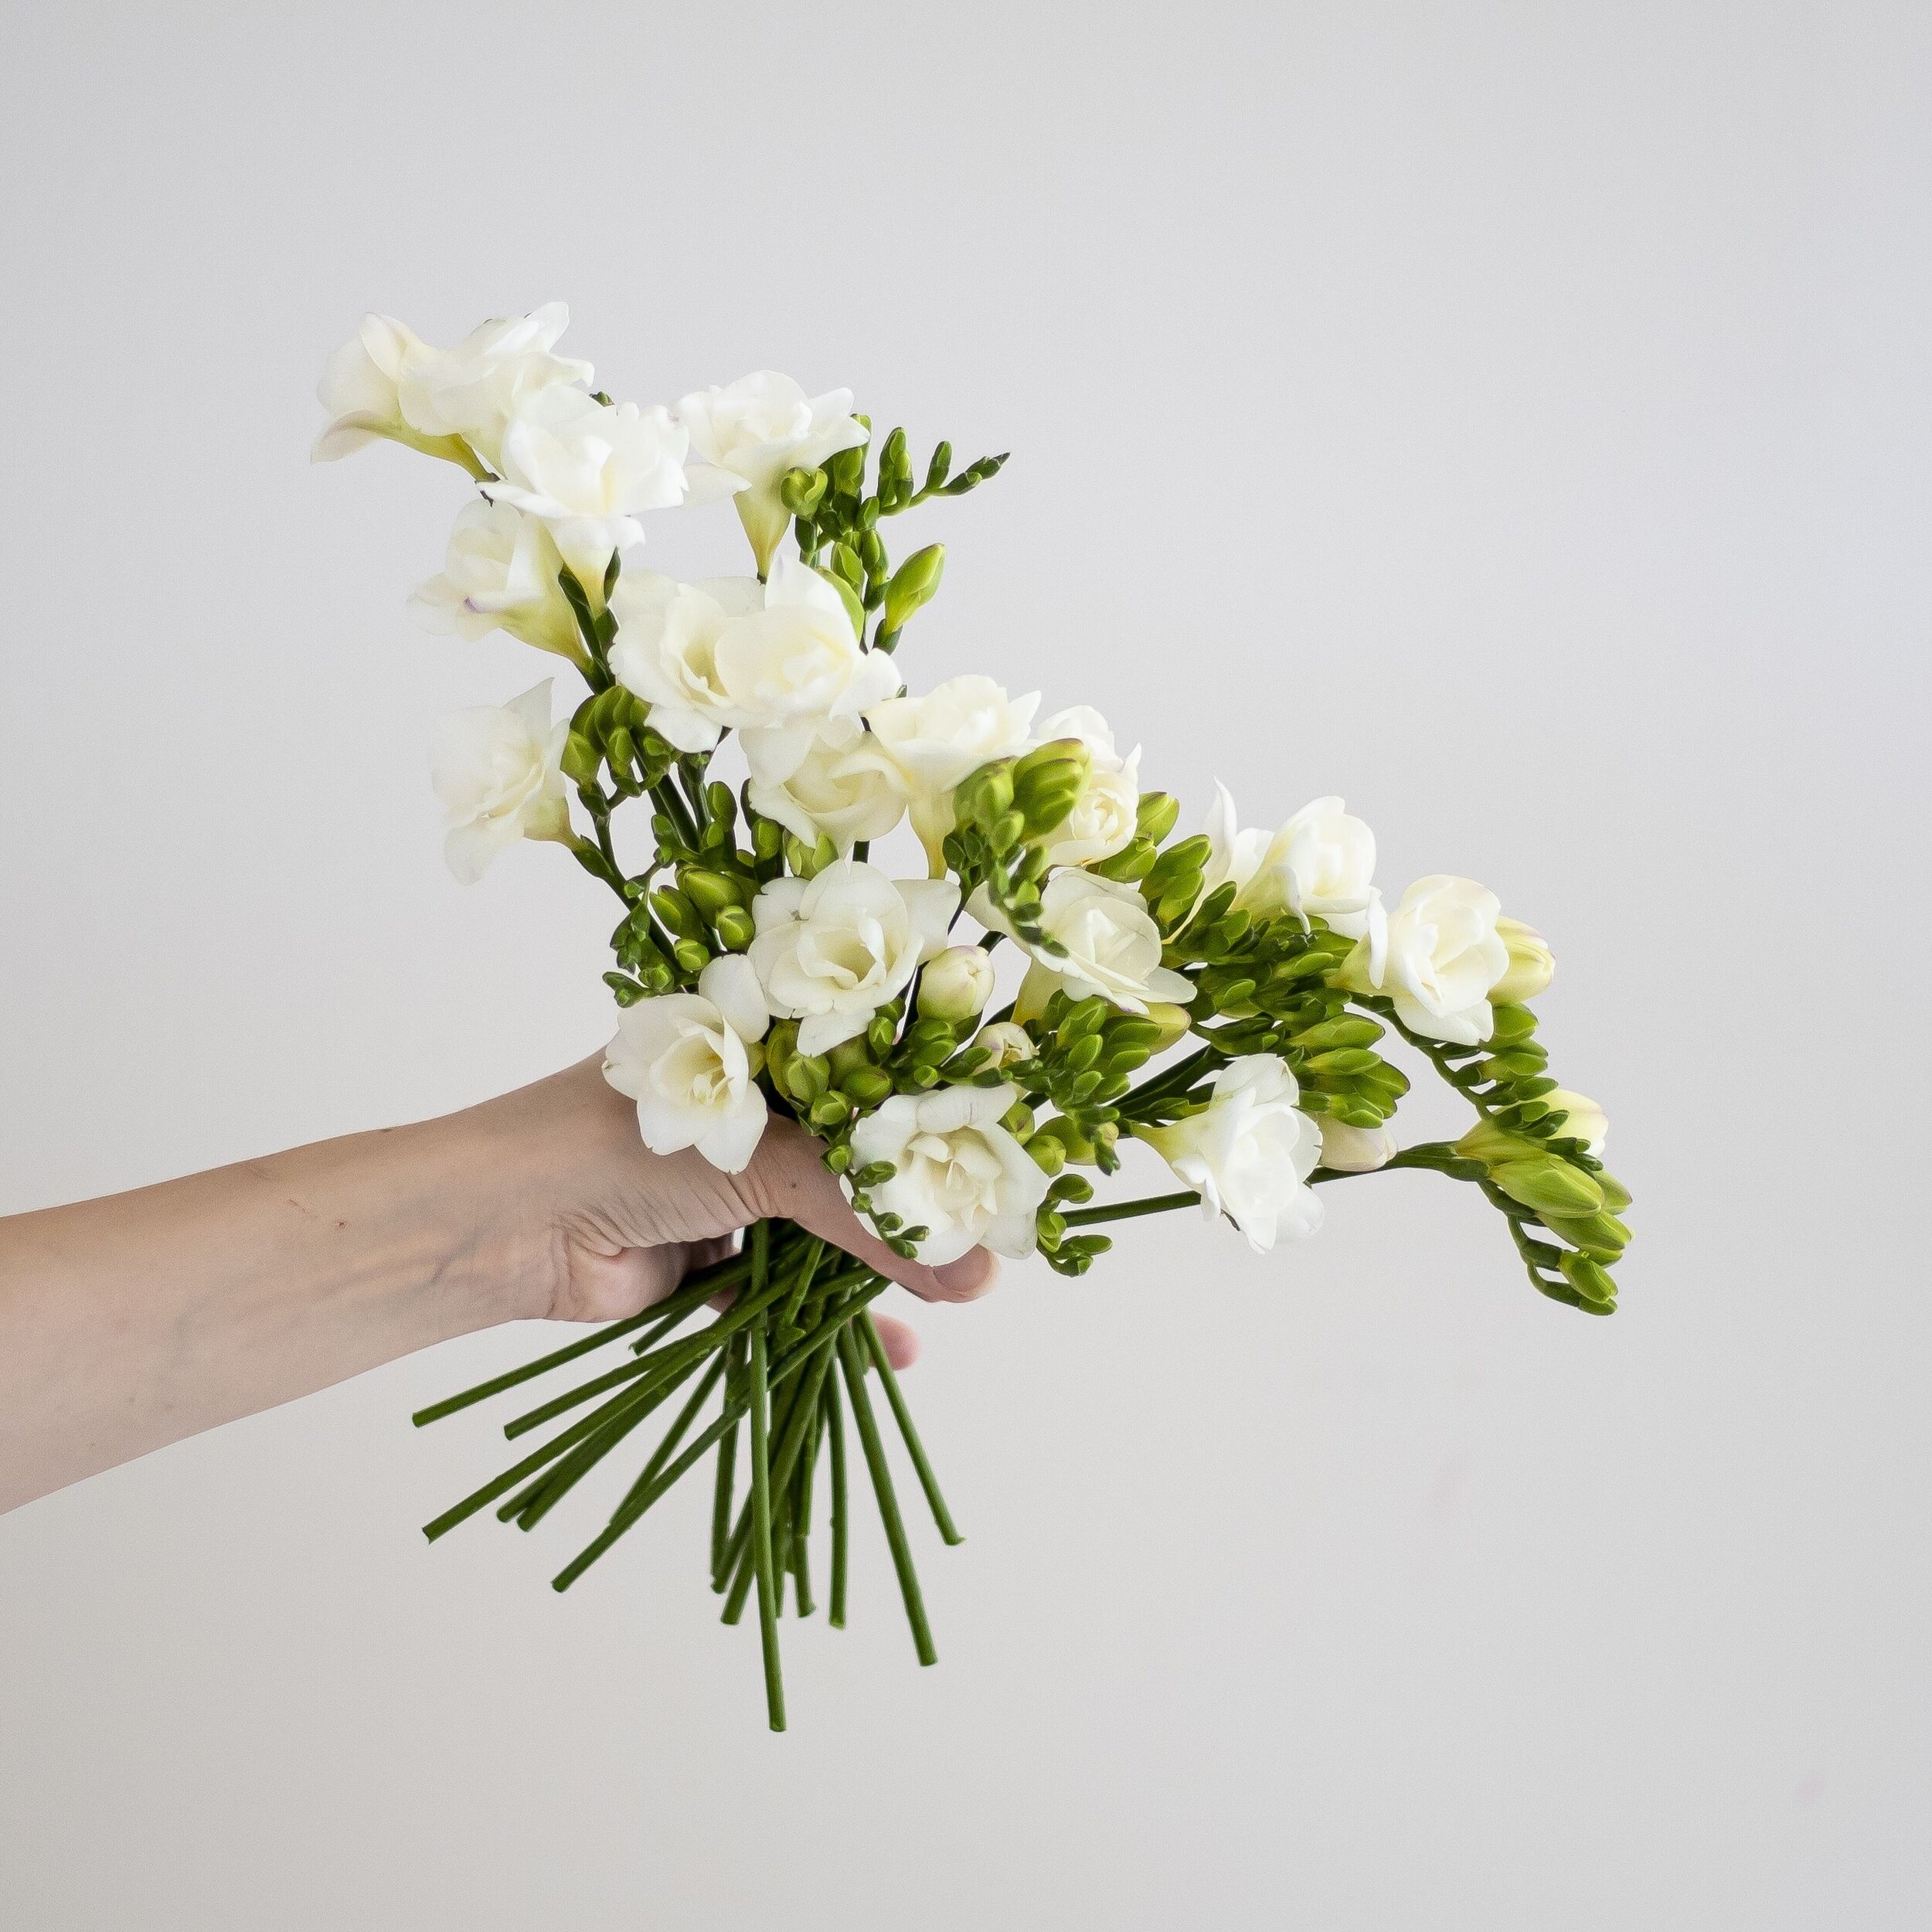 A bouquet of white freesia flowers being held up in front of a white background